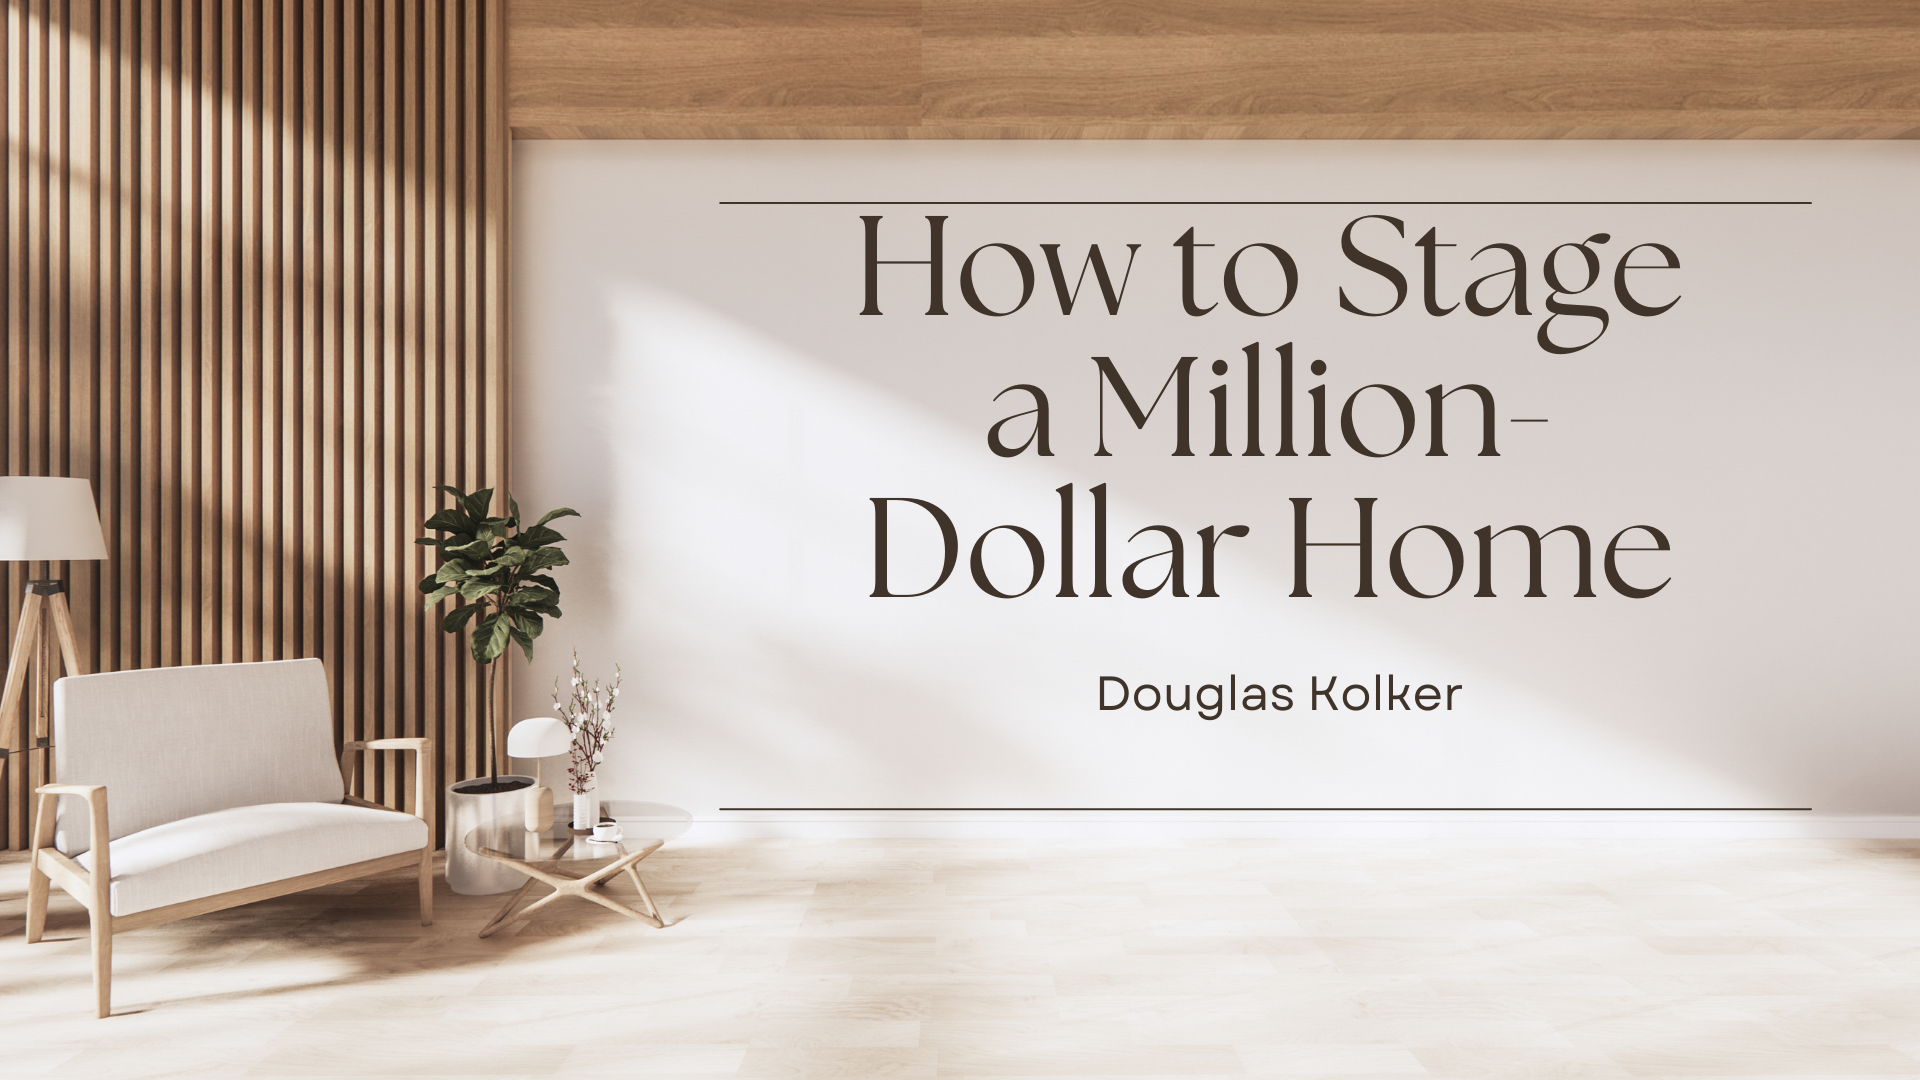 How to Stage a Million-Dollar Home